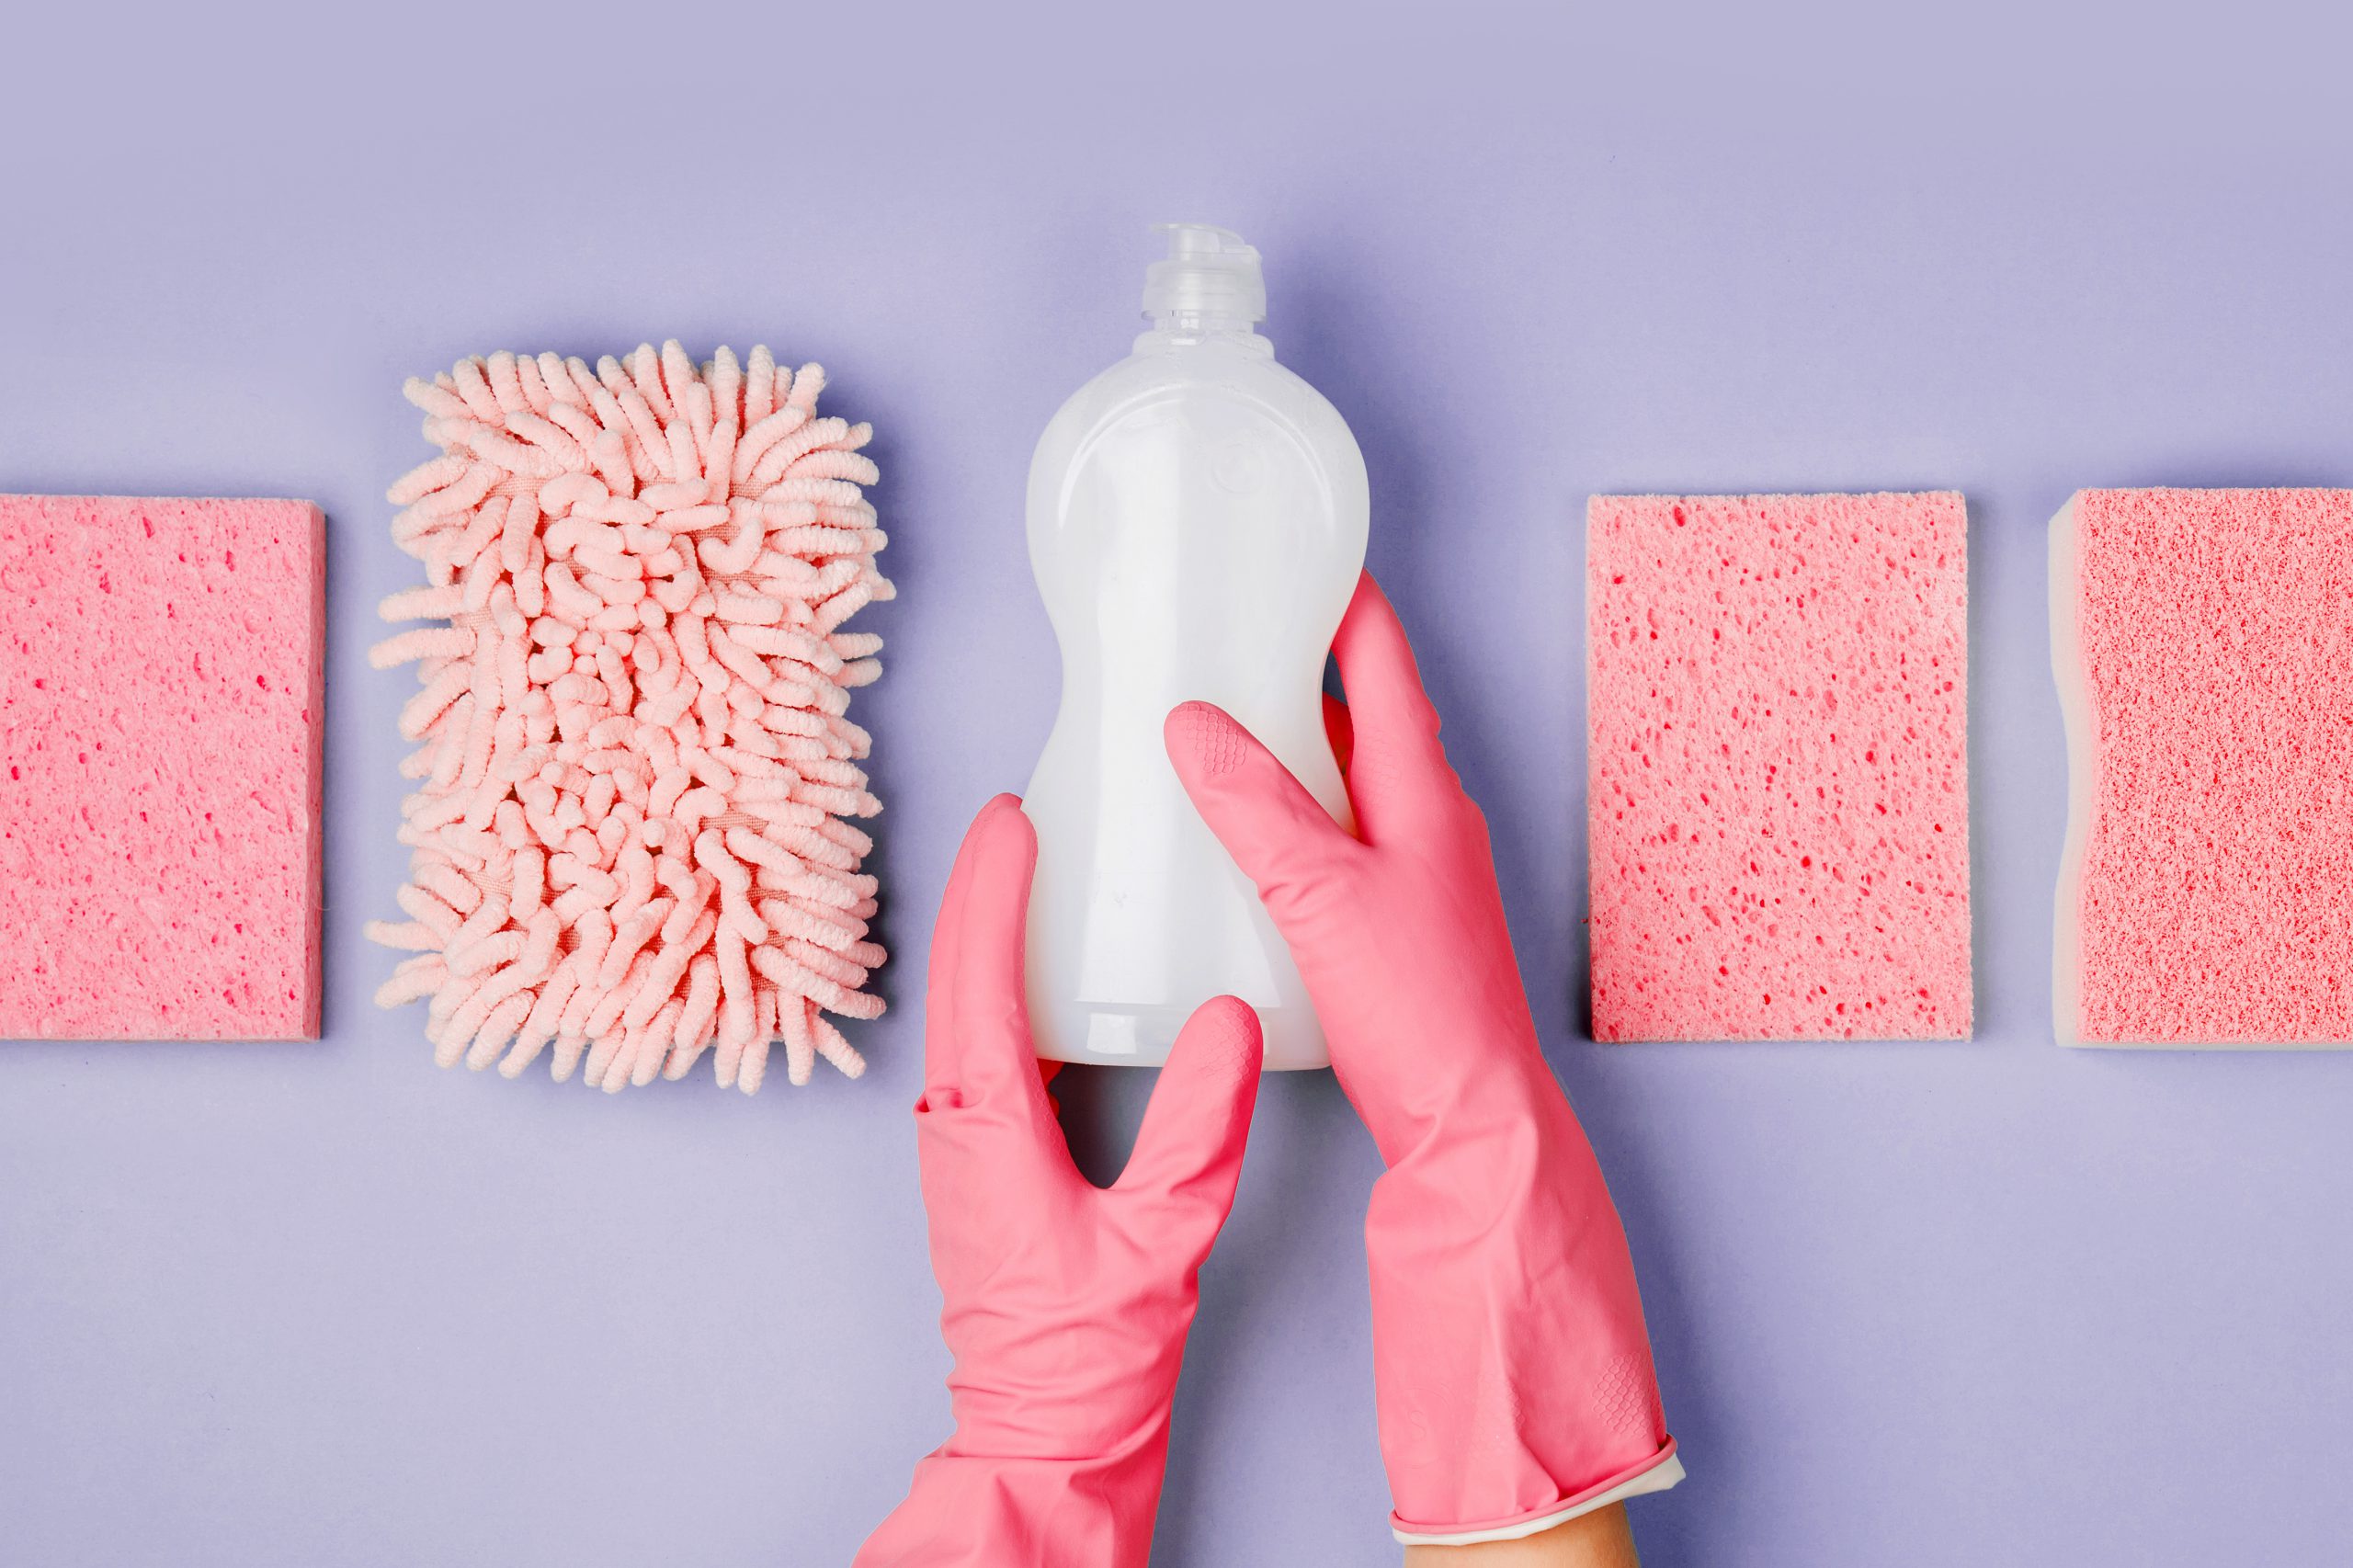 5 Most Overlooked Spots to Clean In Your Home